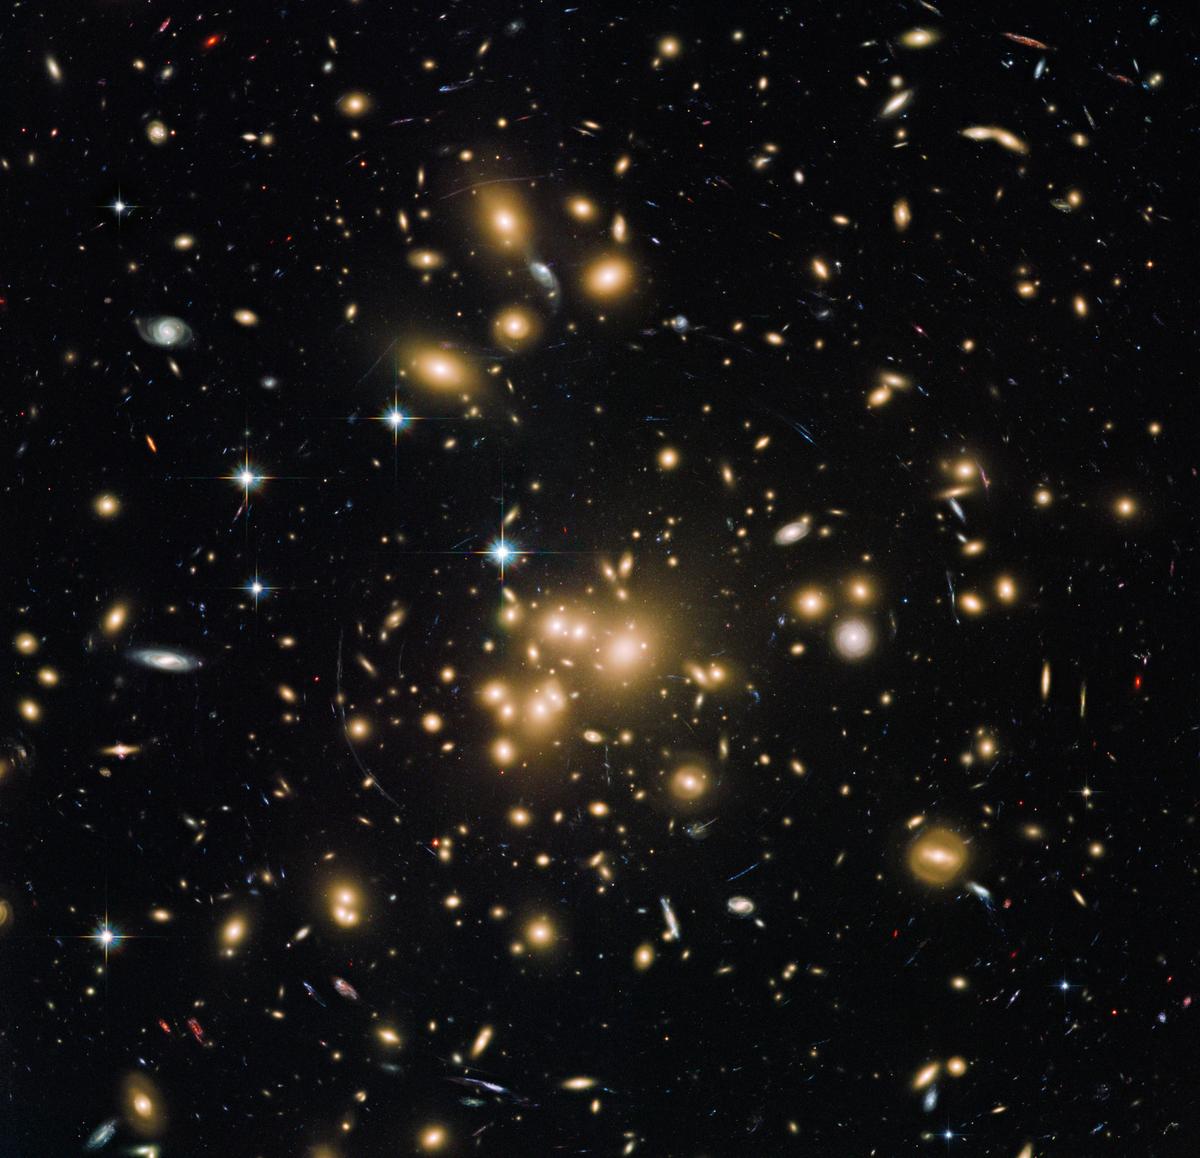 New Hubble view of galaxy cluster Abell 